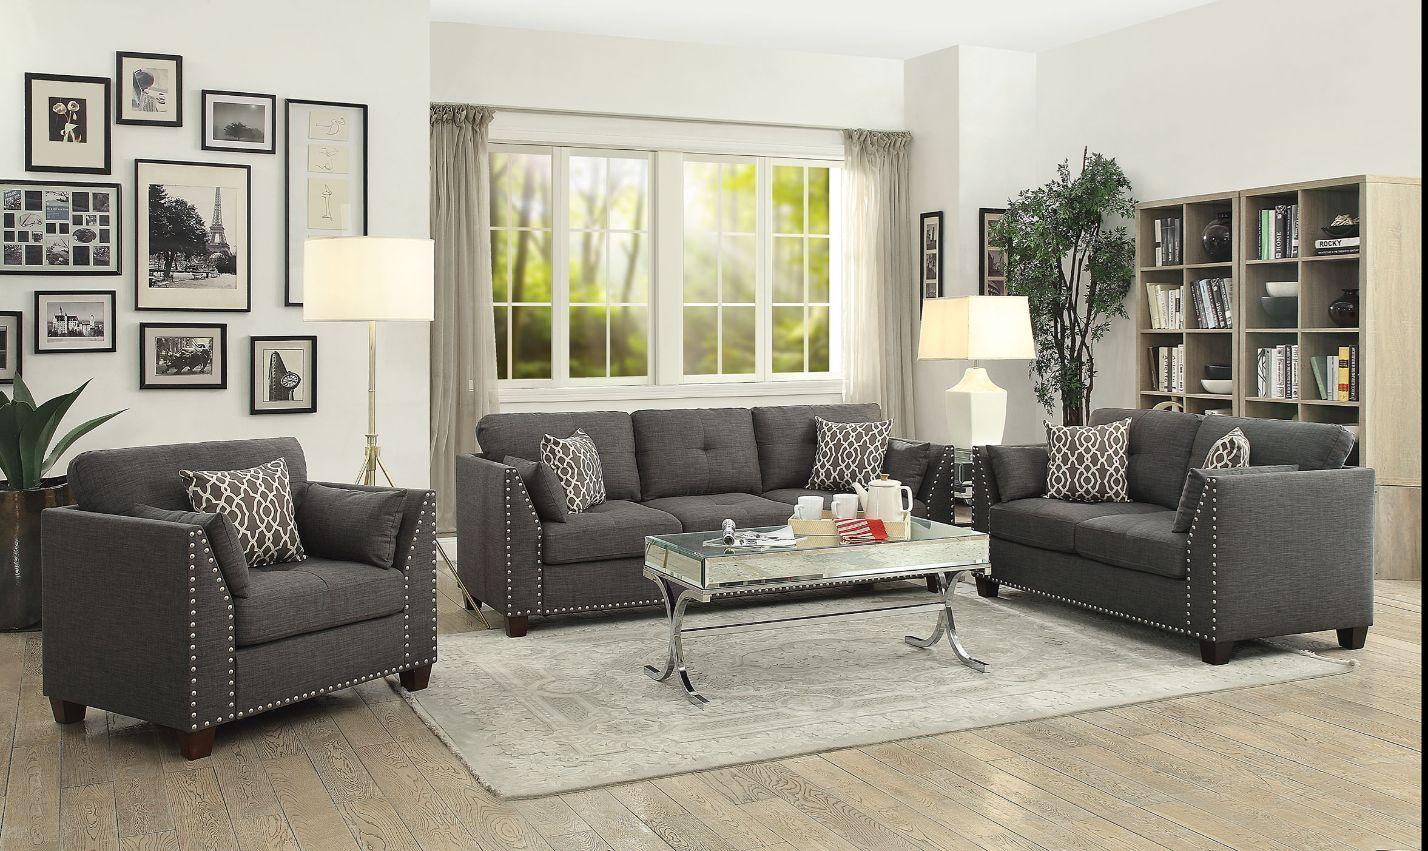 Contemporary, Classic, Simple Sofa Loveseat and Chair Set Laurissa 52405-3pcs in Charcoal Linen